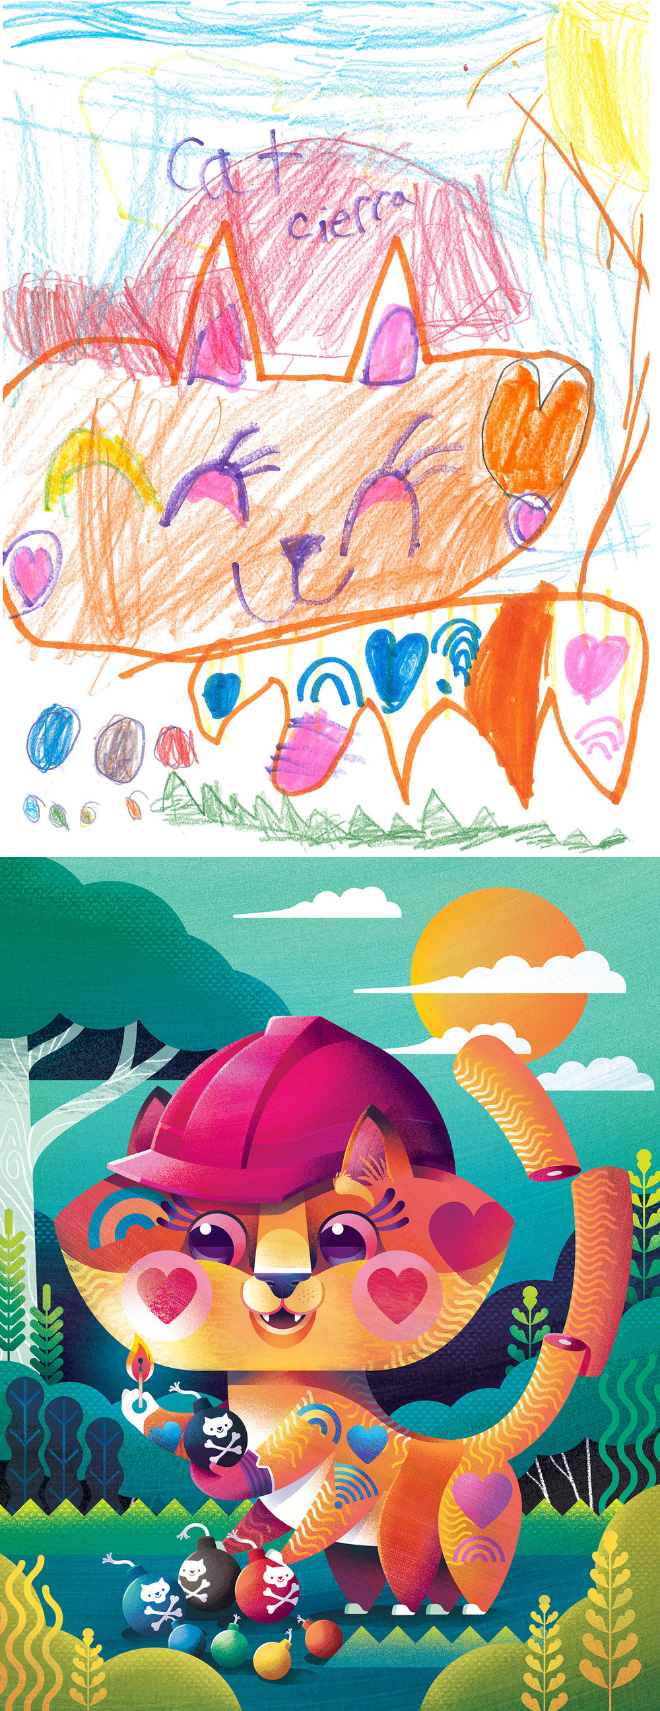 When kids' doodles get recreated by a professional artist.